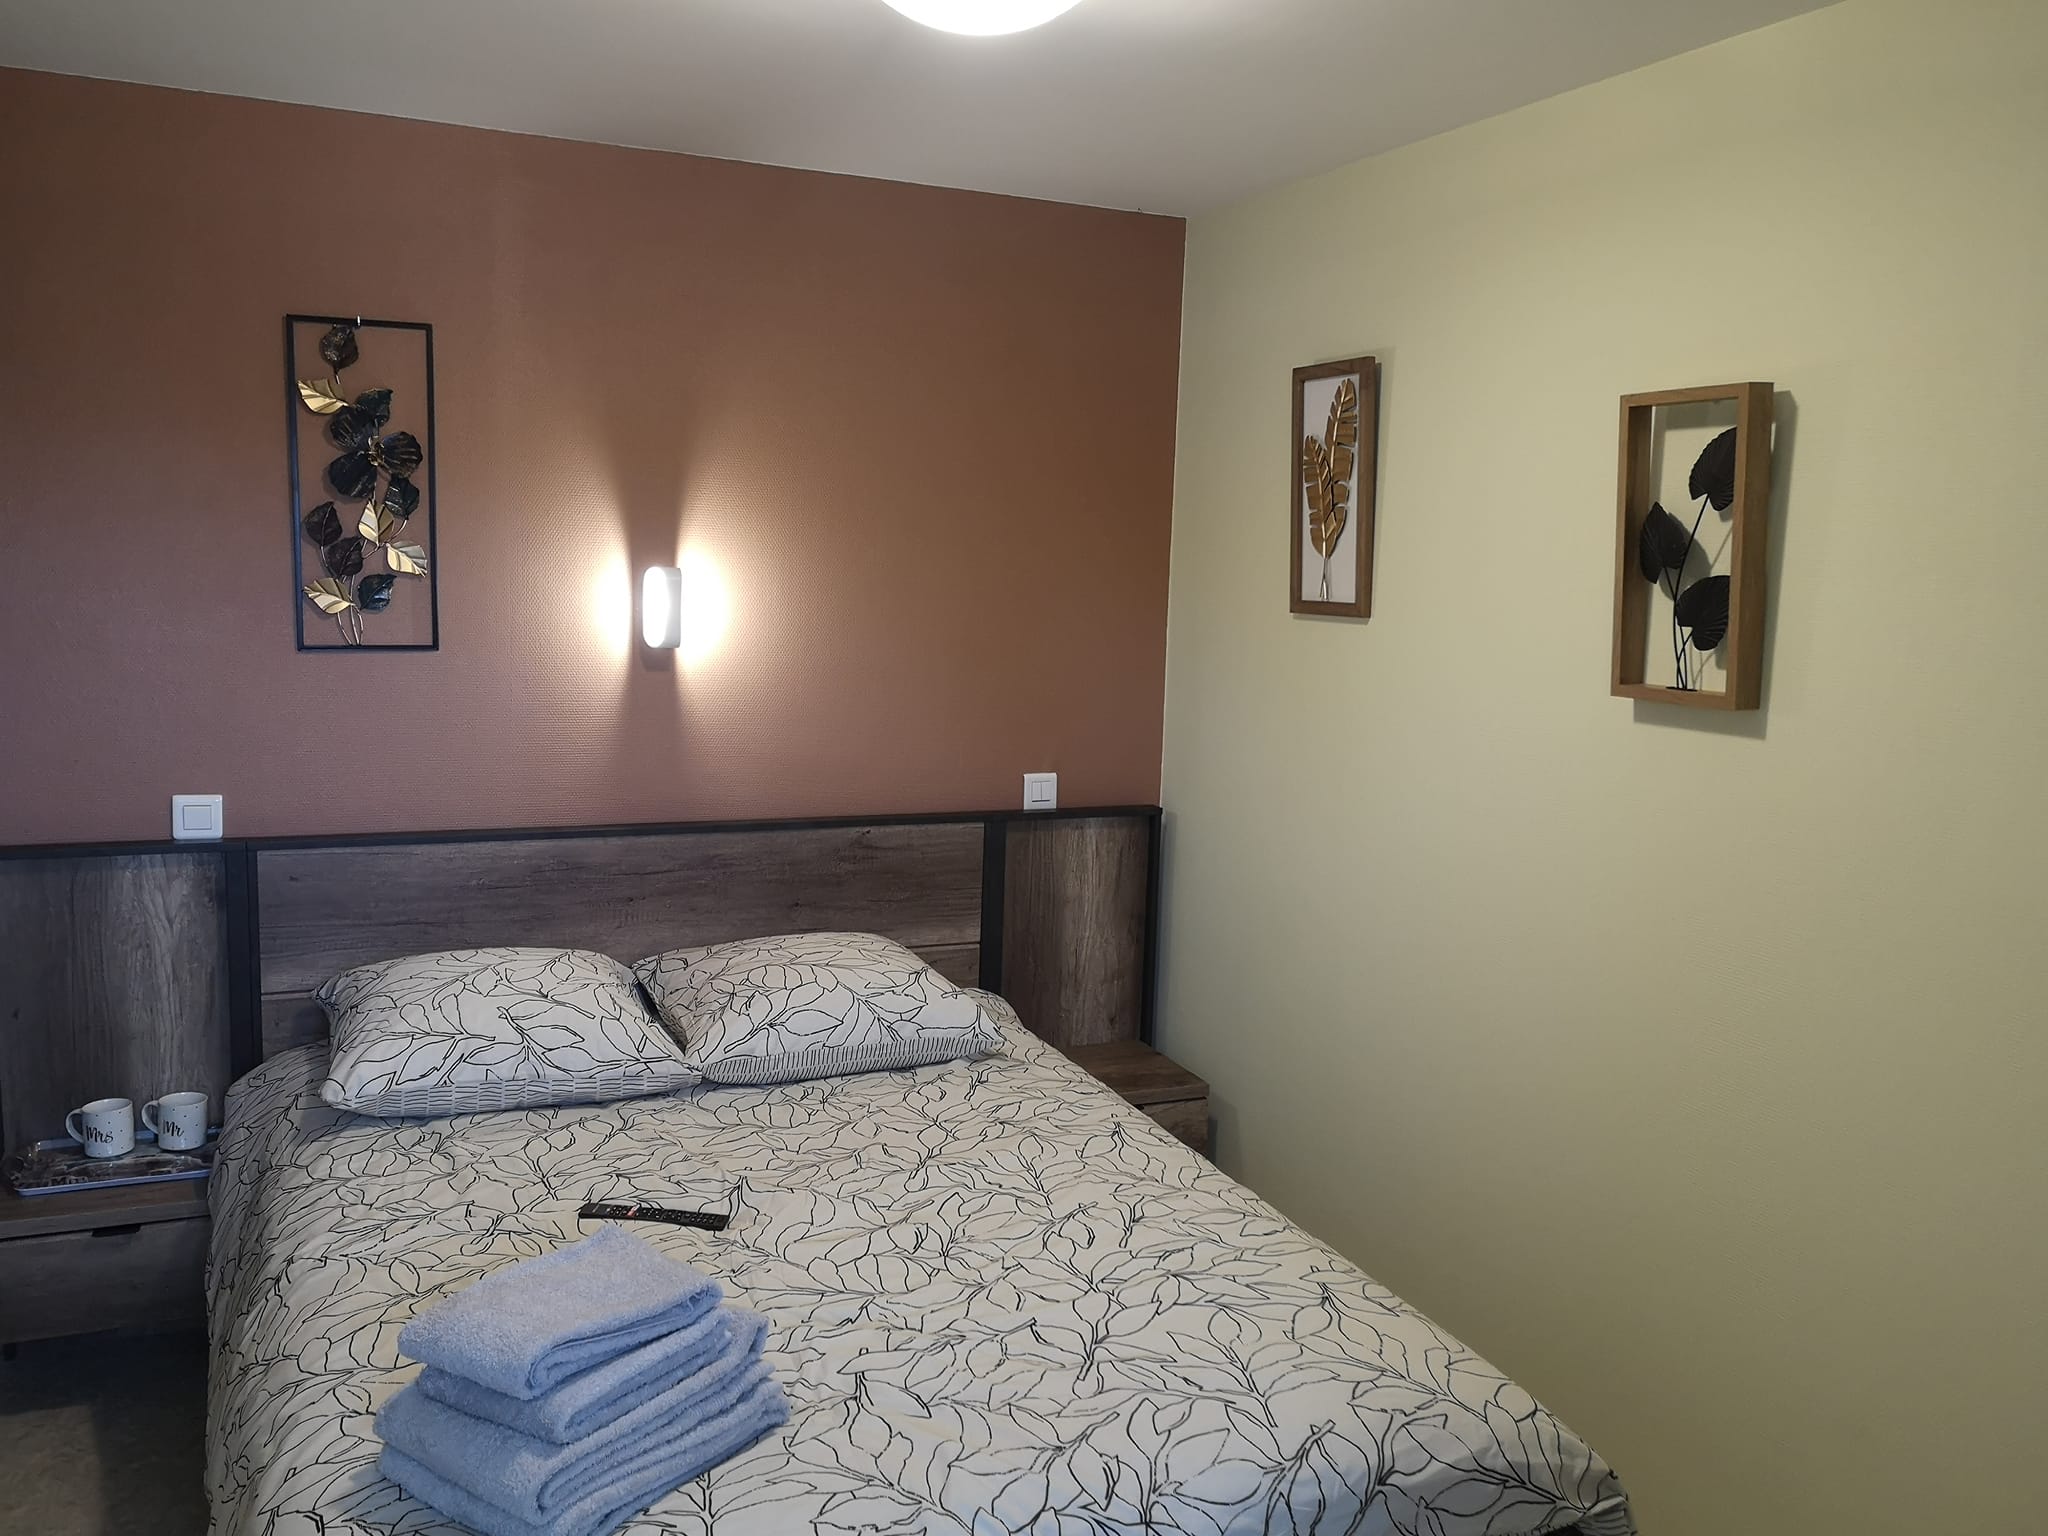 ChambresDhotes-AubergeQuatreRoutesAlbussac-chambre4_9